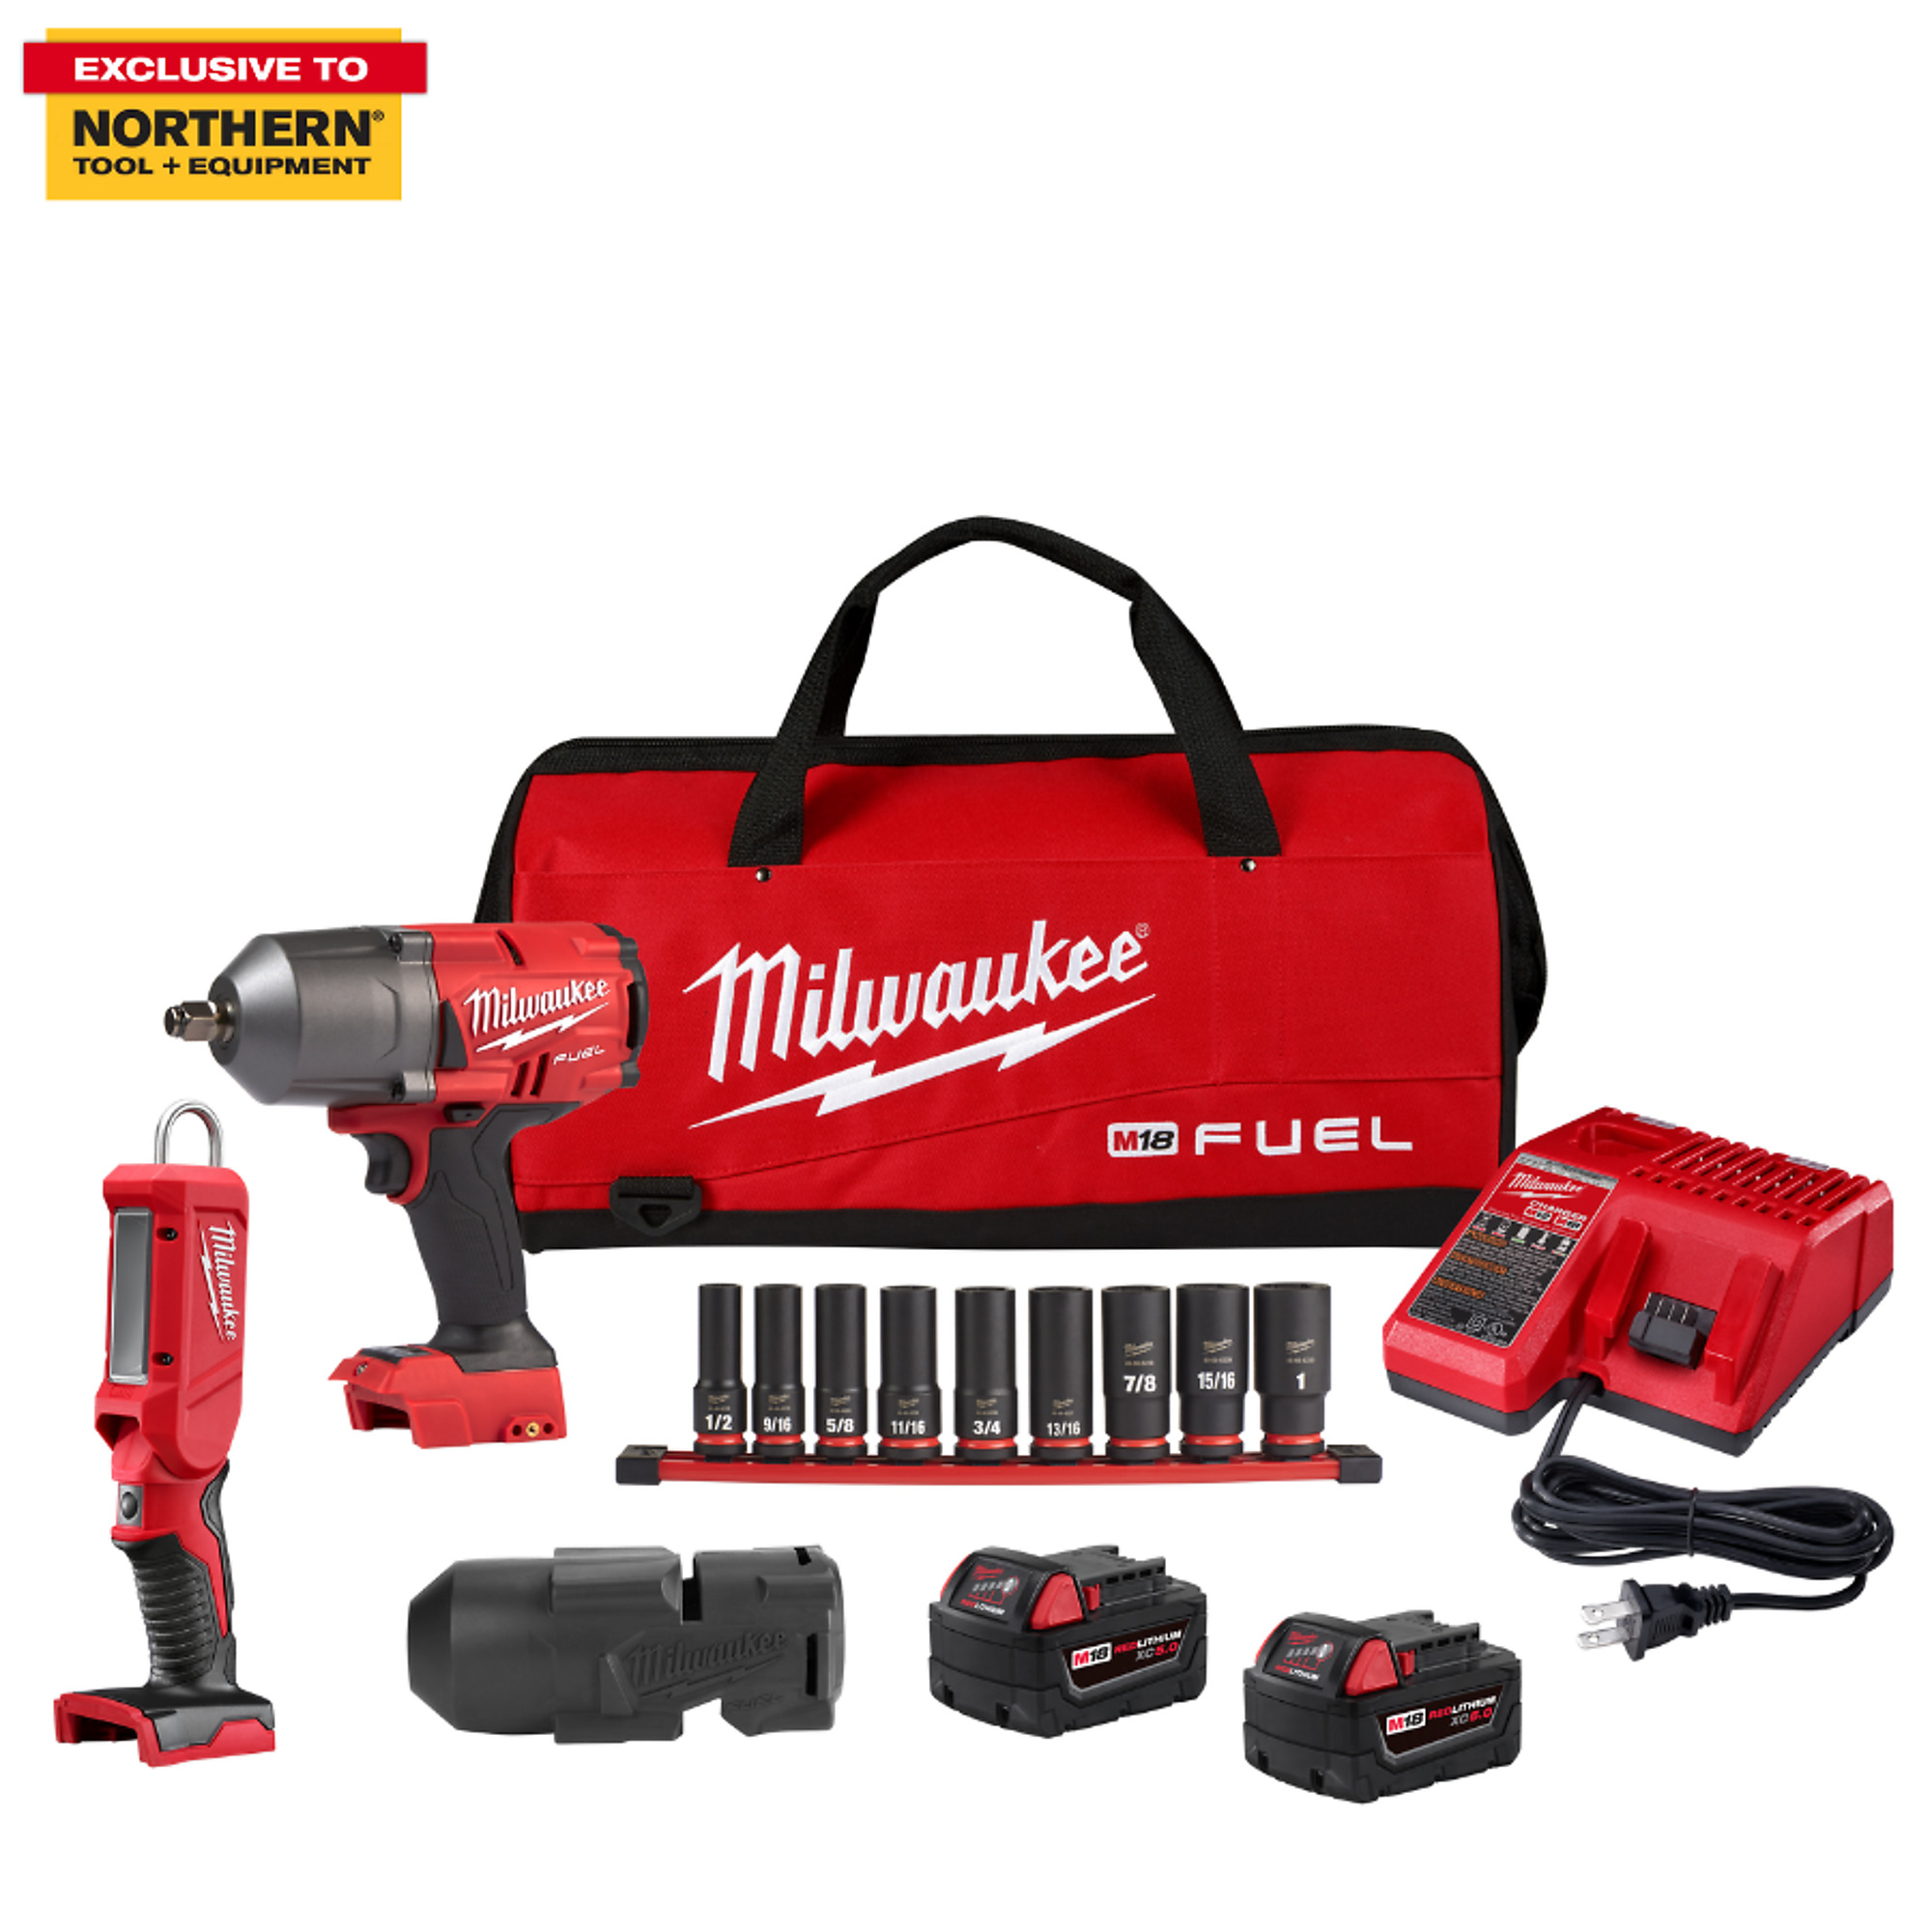 Milwaukee M18 FUEL Lithium-Ion 1/2Inch Impact Wrench, LED Stick Light and Impact Socket Set, 2 Batteries, Model 2767-22S2